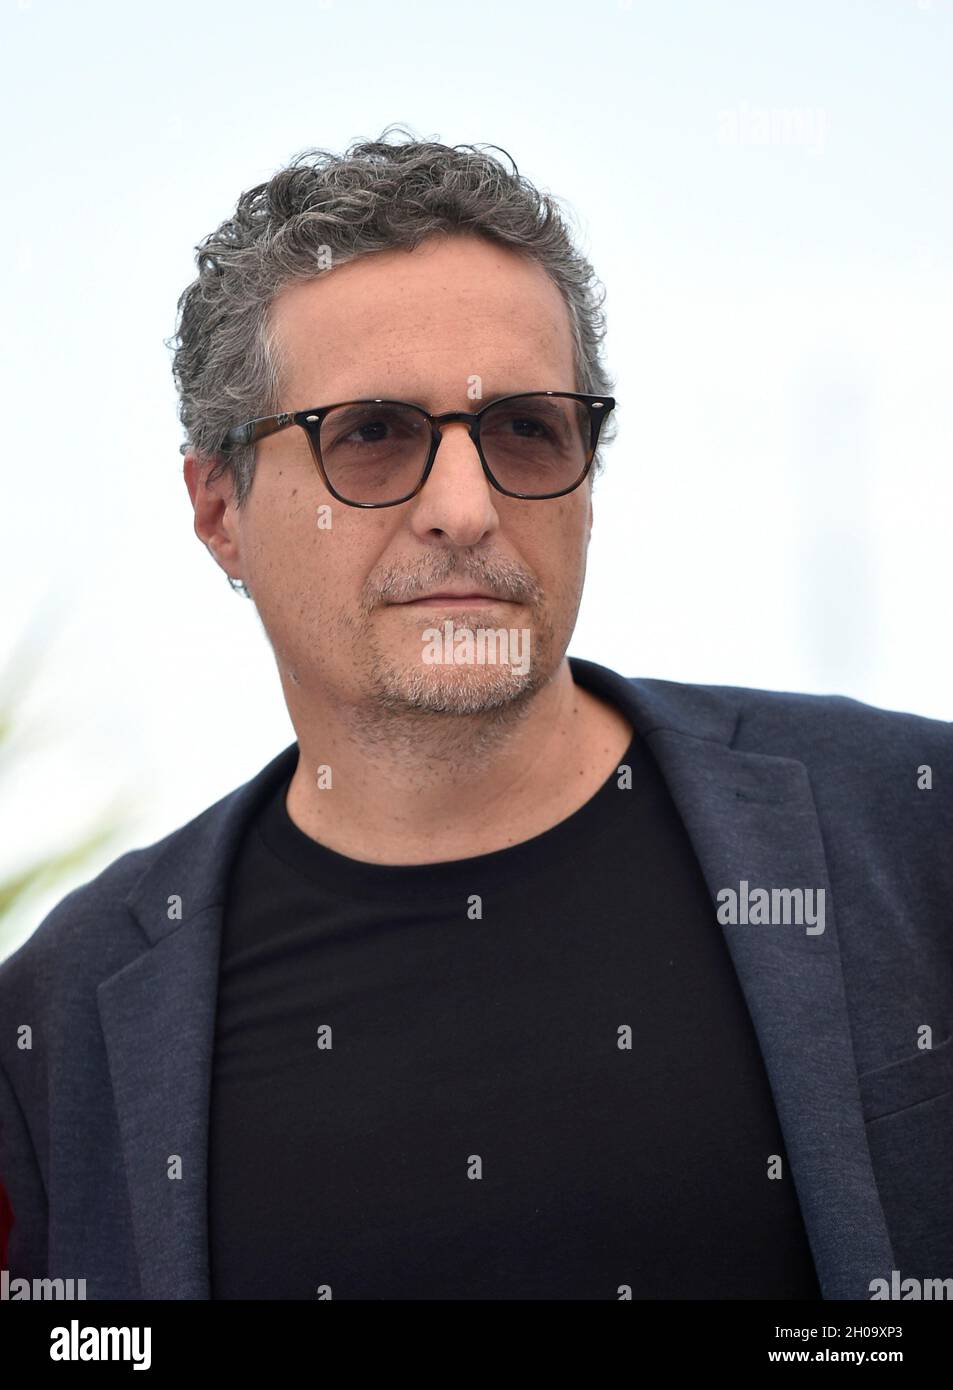 74th edition of the Cannes Film Festival: Kleber Mendoca Filho posing during a photocall with the official jury members of the Cannes Film Festival, o Stock Photo